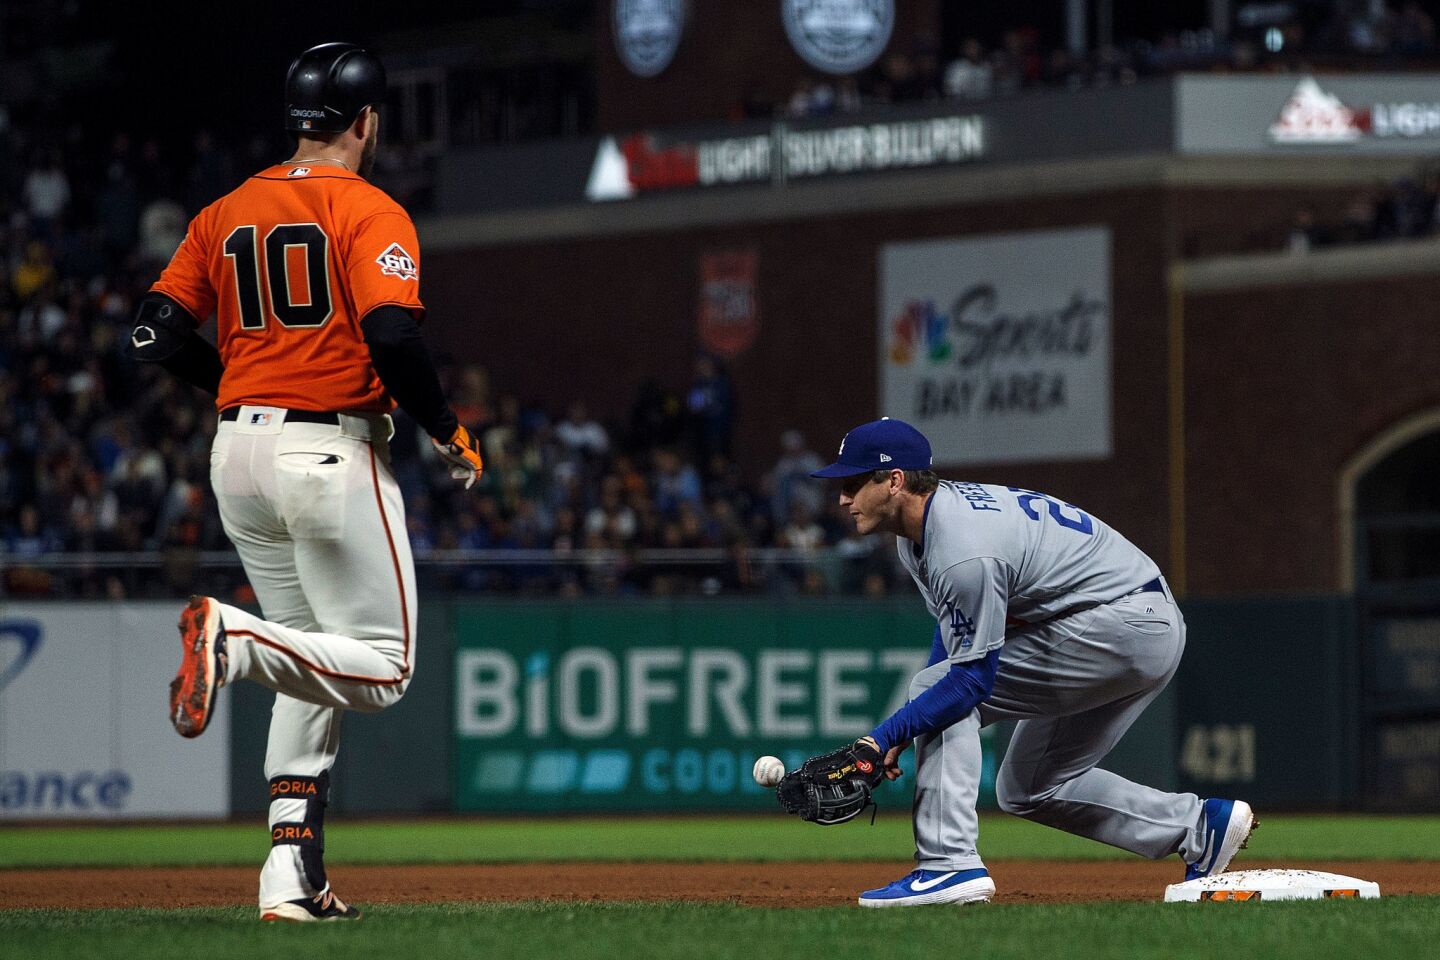 SAN FRANCISCO, CA - SEPTEMBER 28: Evan Longoria #10 of the San Francisco Giants reaches first base on an error by David Freese #25 of the Los Angeles Dodgers during the fourth inning at AT&T Park on September 28, 2018 in San Francisco, California. The Los Angeles Dodgers defeated the San Francisco Giants 3-1. (Photo by Jason O. Watson/Getty Images) ** OUTS - ELSENT, FPG, CM - OUTS * NM, PH, VA if sourced by CT, LA or MoD **